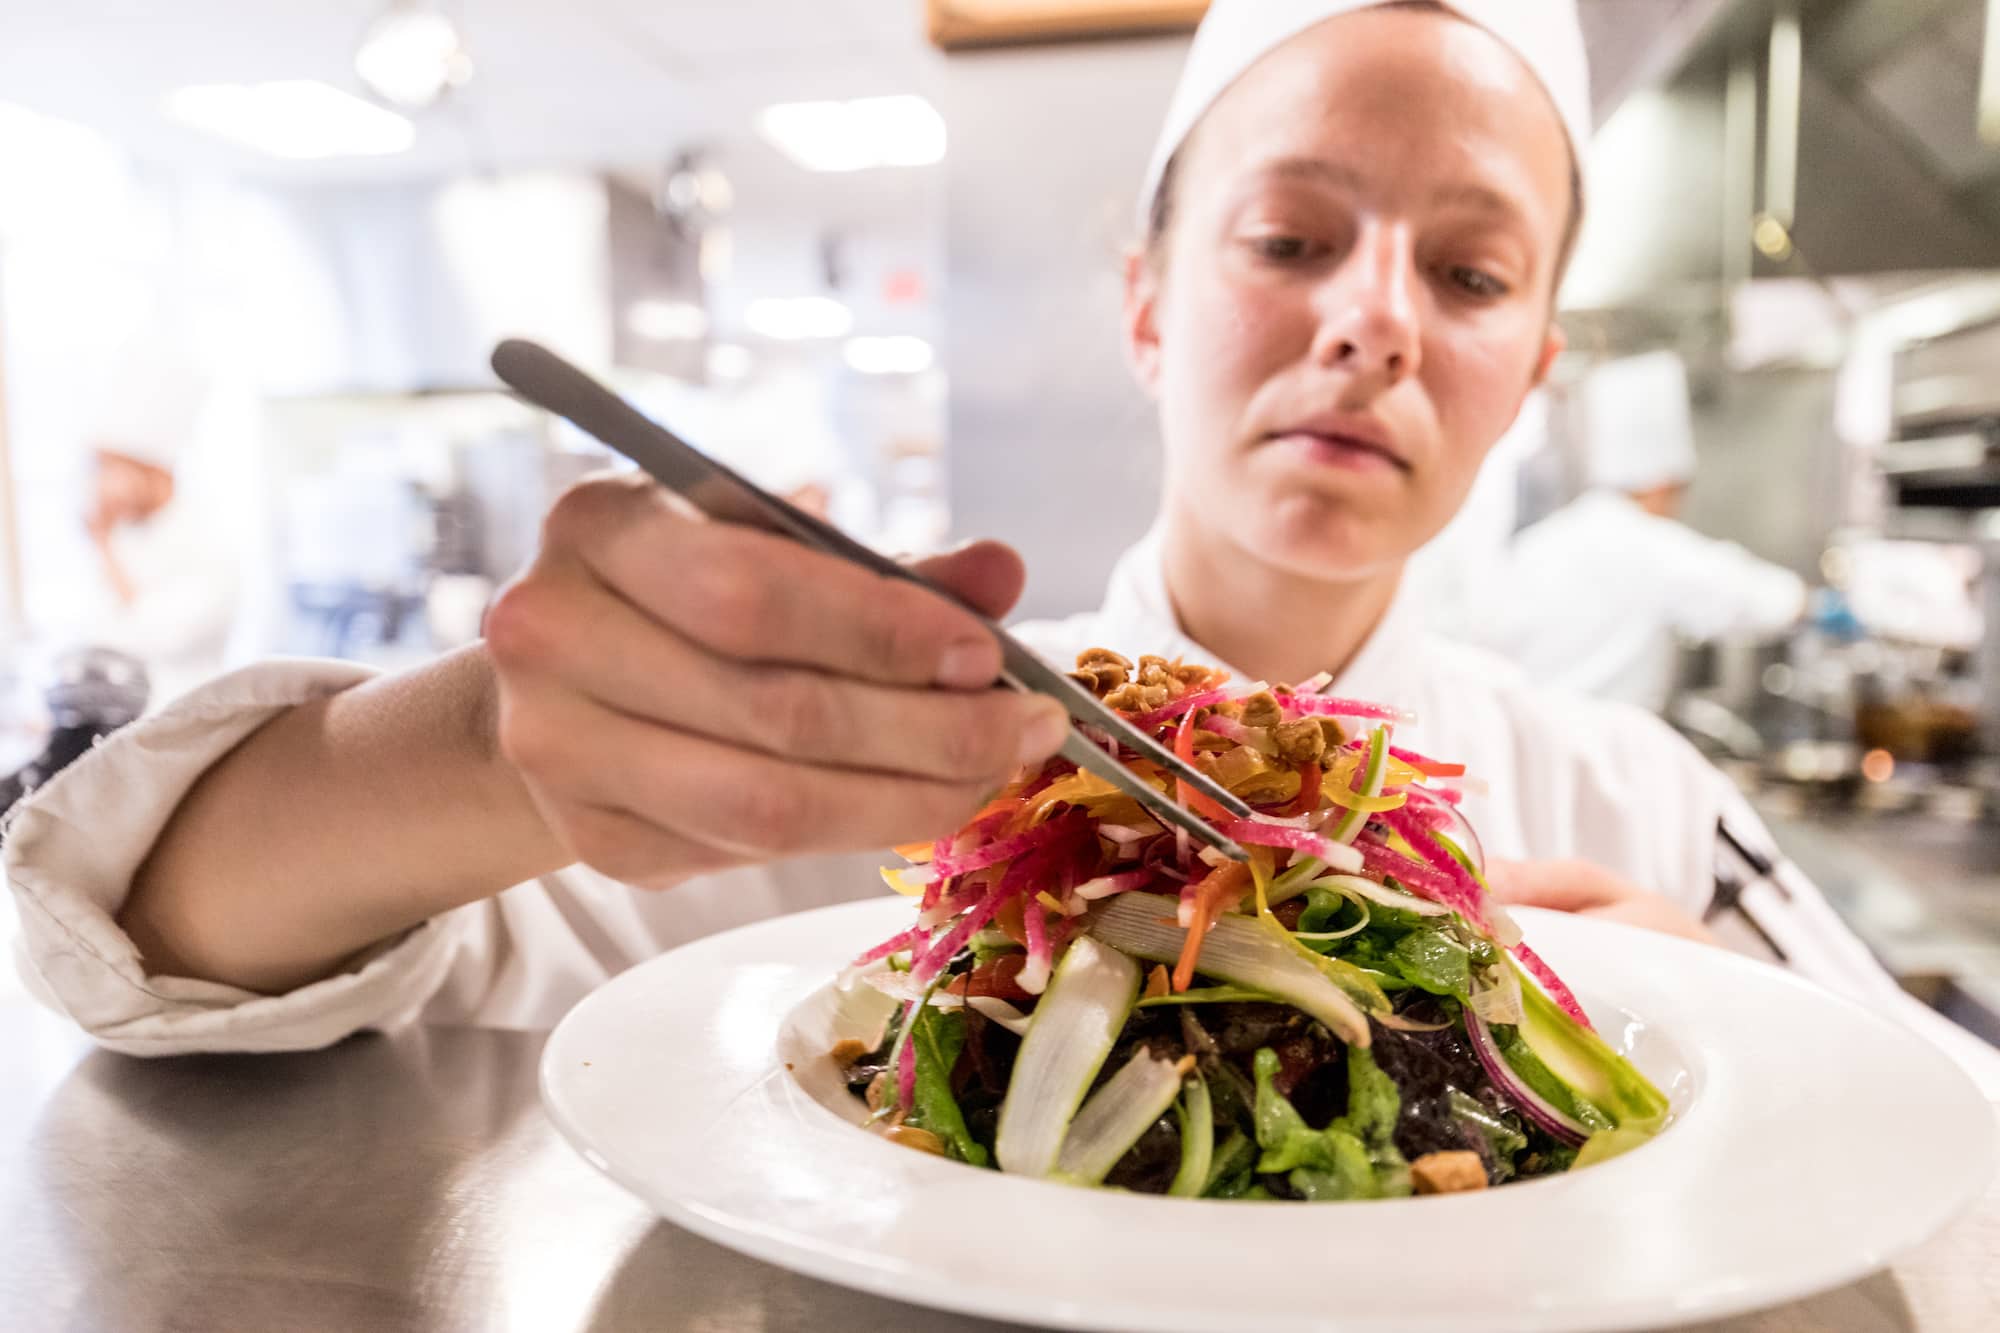 A person wearing white cooking clothes carefully assembles a fancy salad.